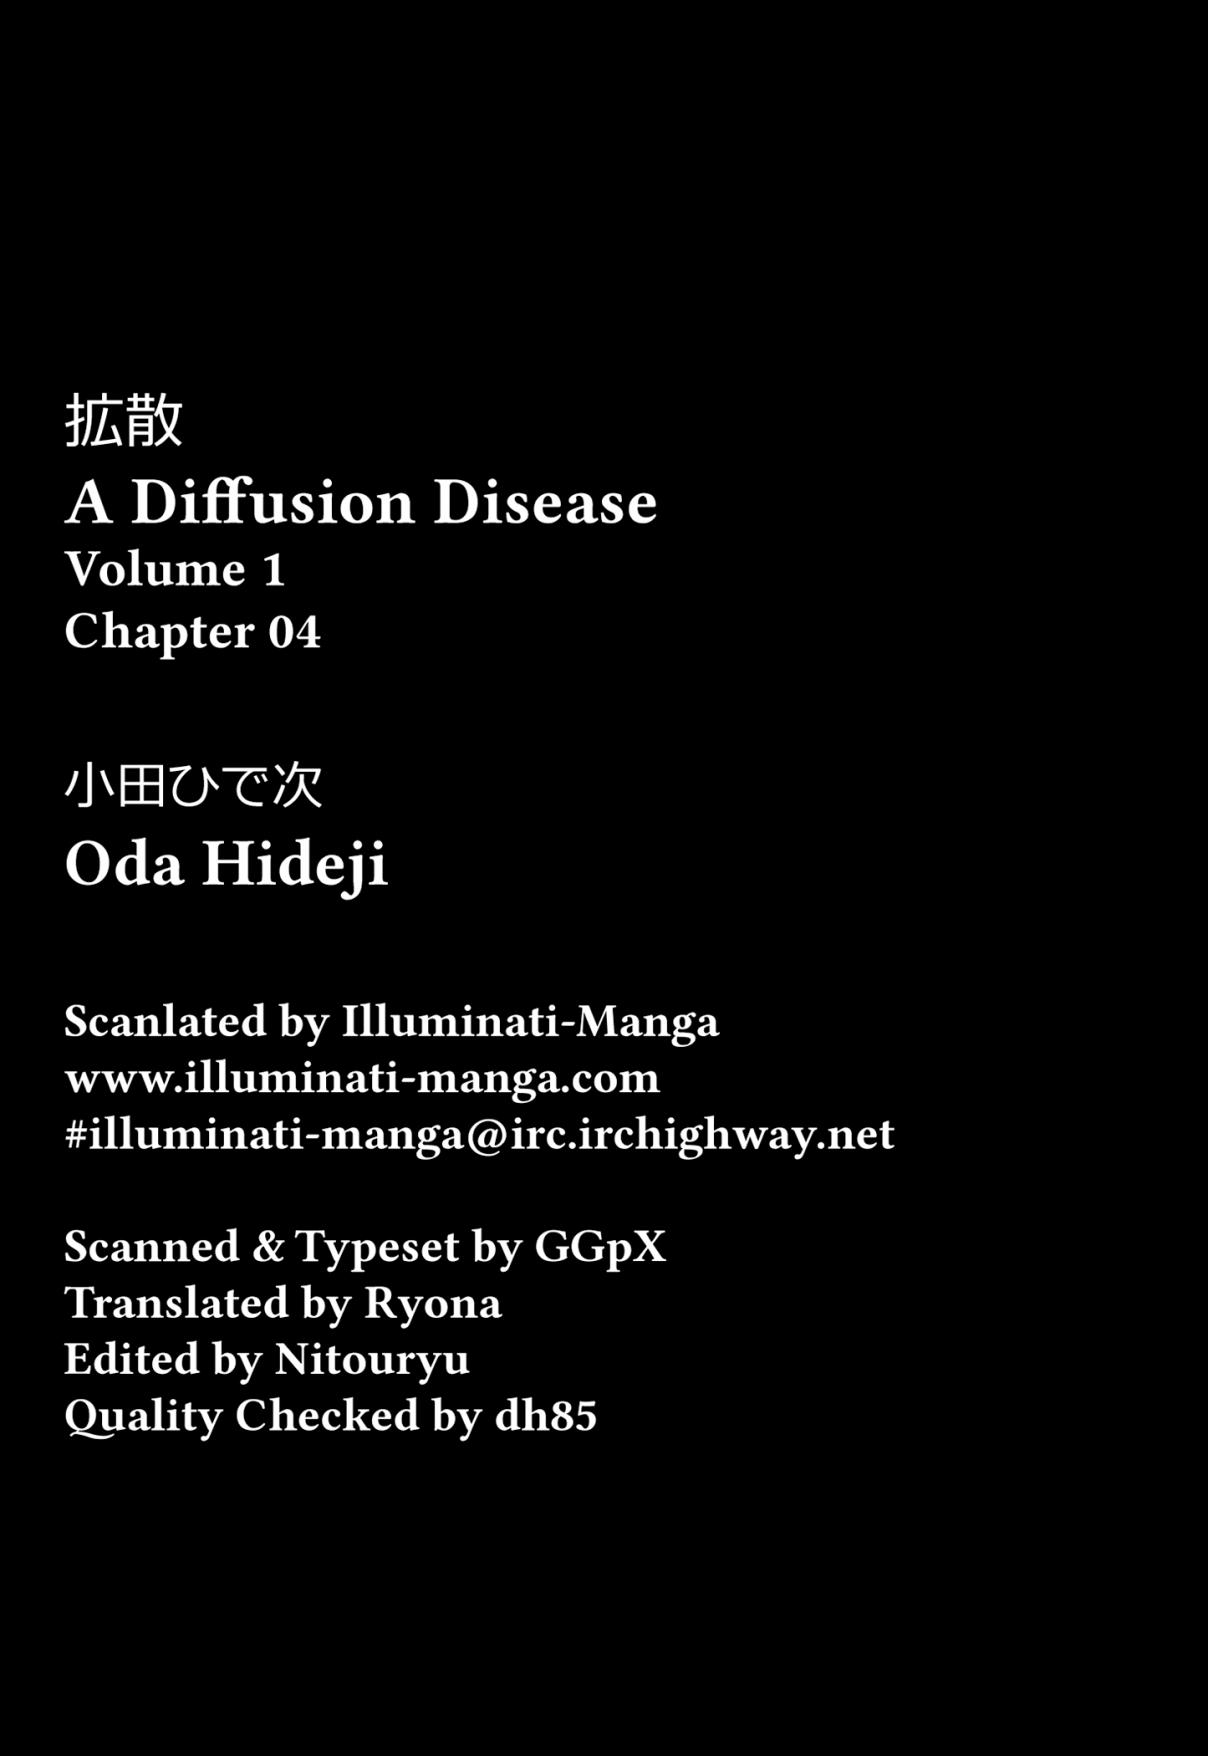 A Diffusion Disease Vol. 1 Ch. 4 Chasing After the Paradise